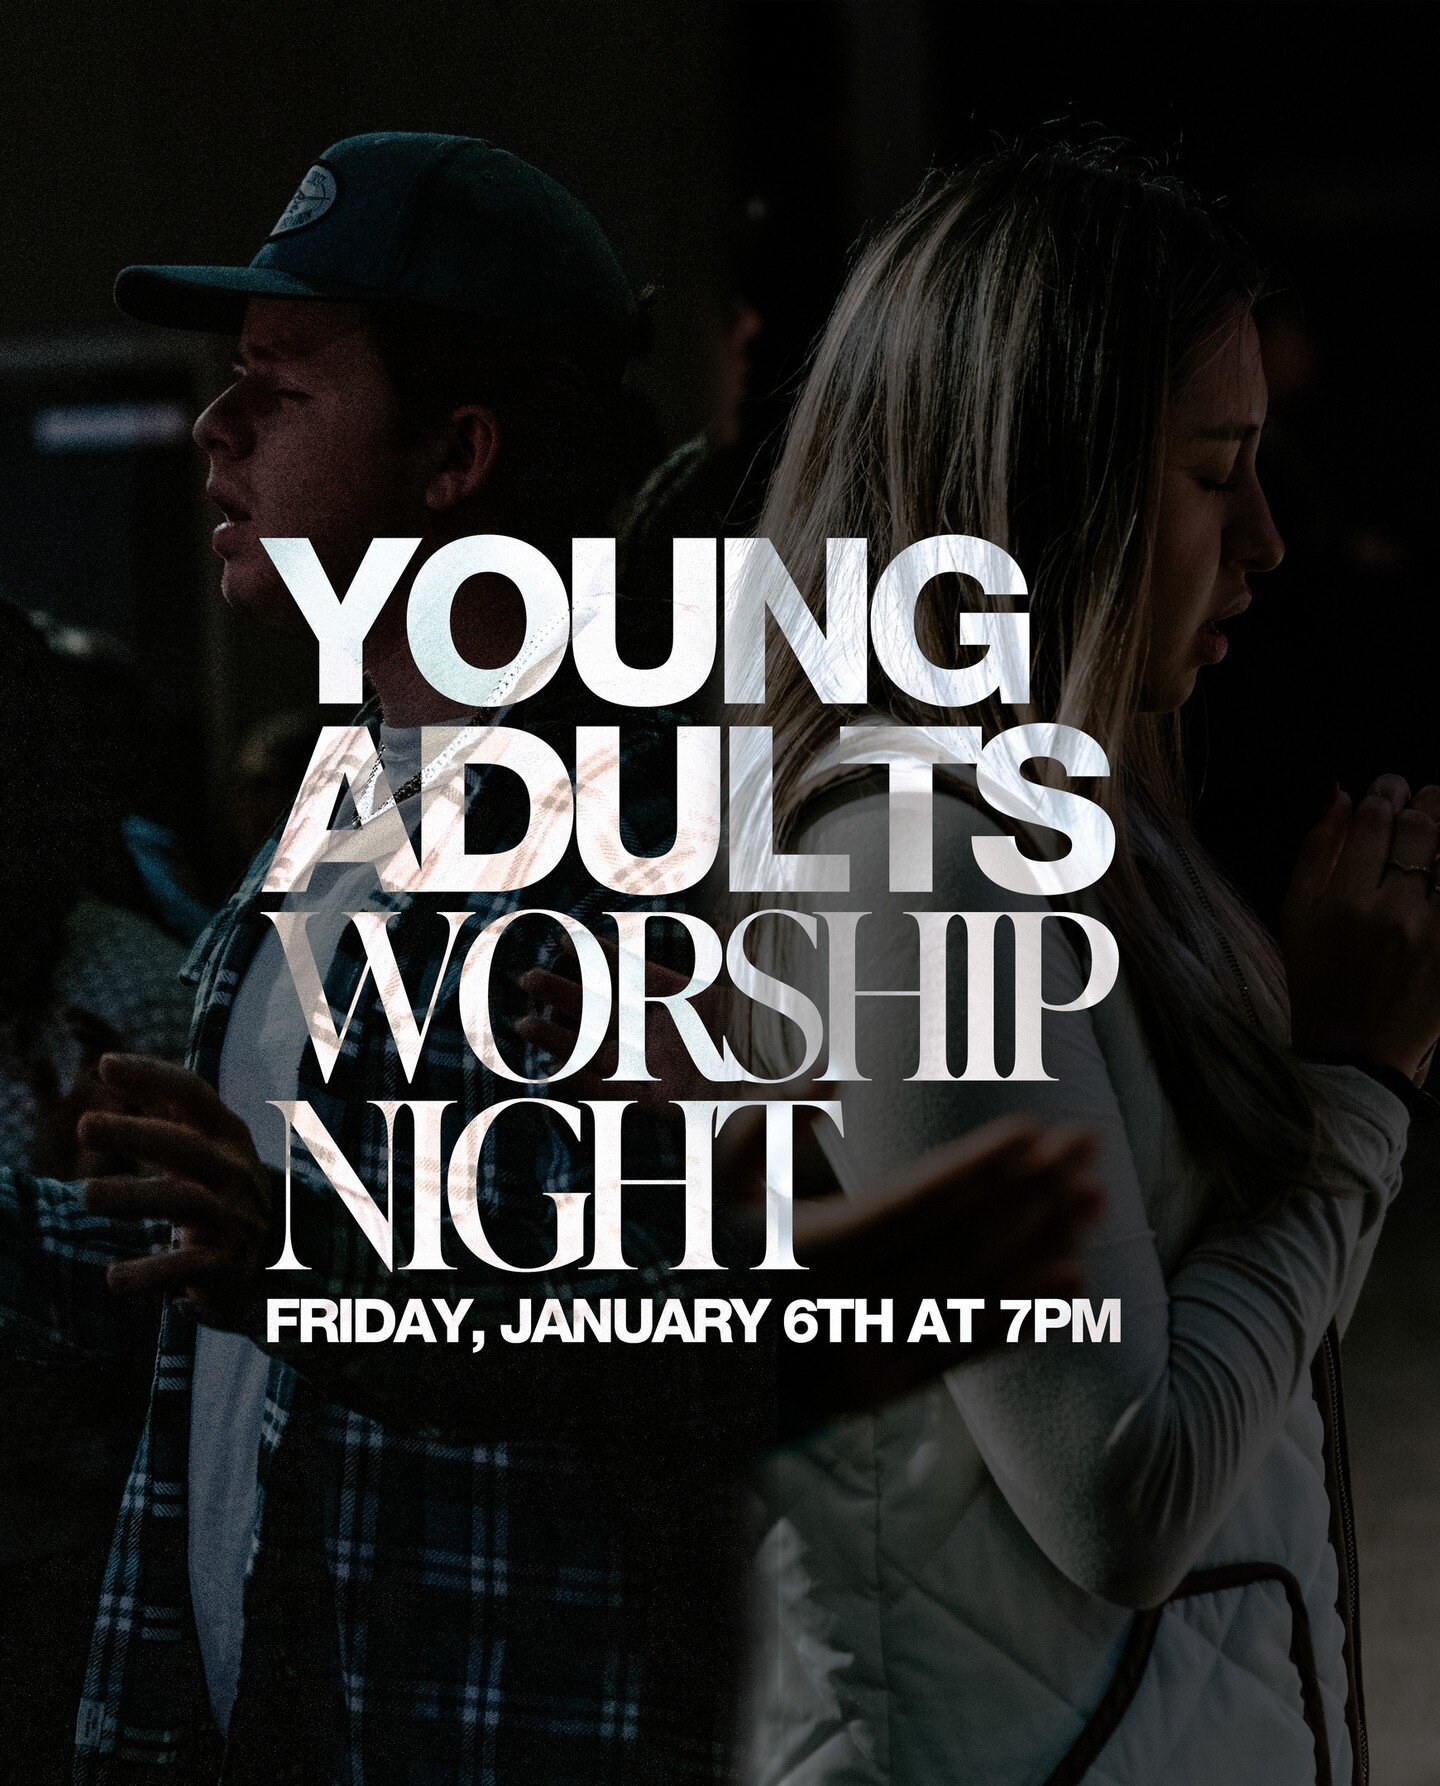 Join us for our Young Adults Worship Night this Friday at 7pm ✨